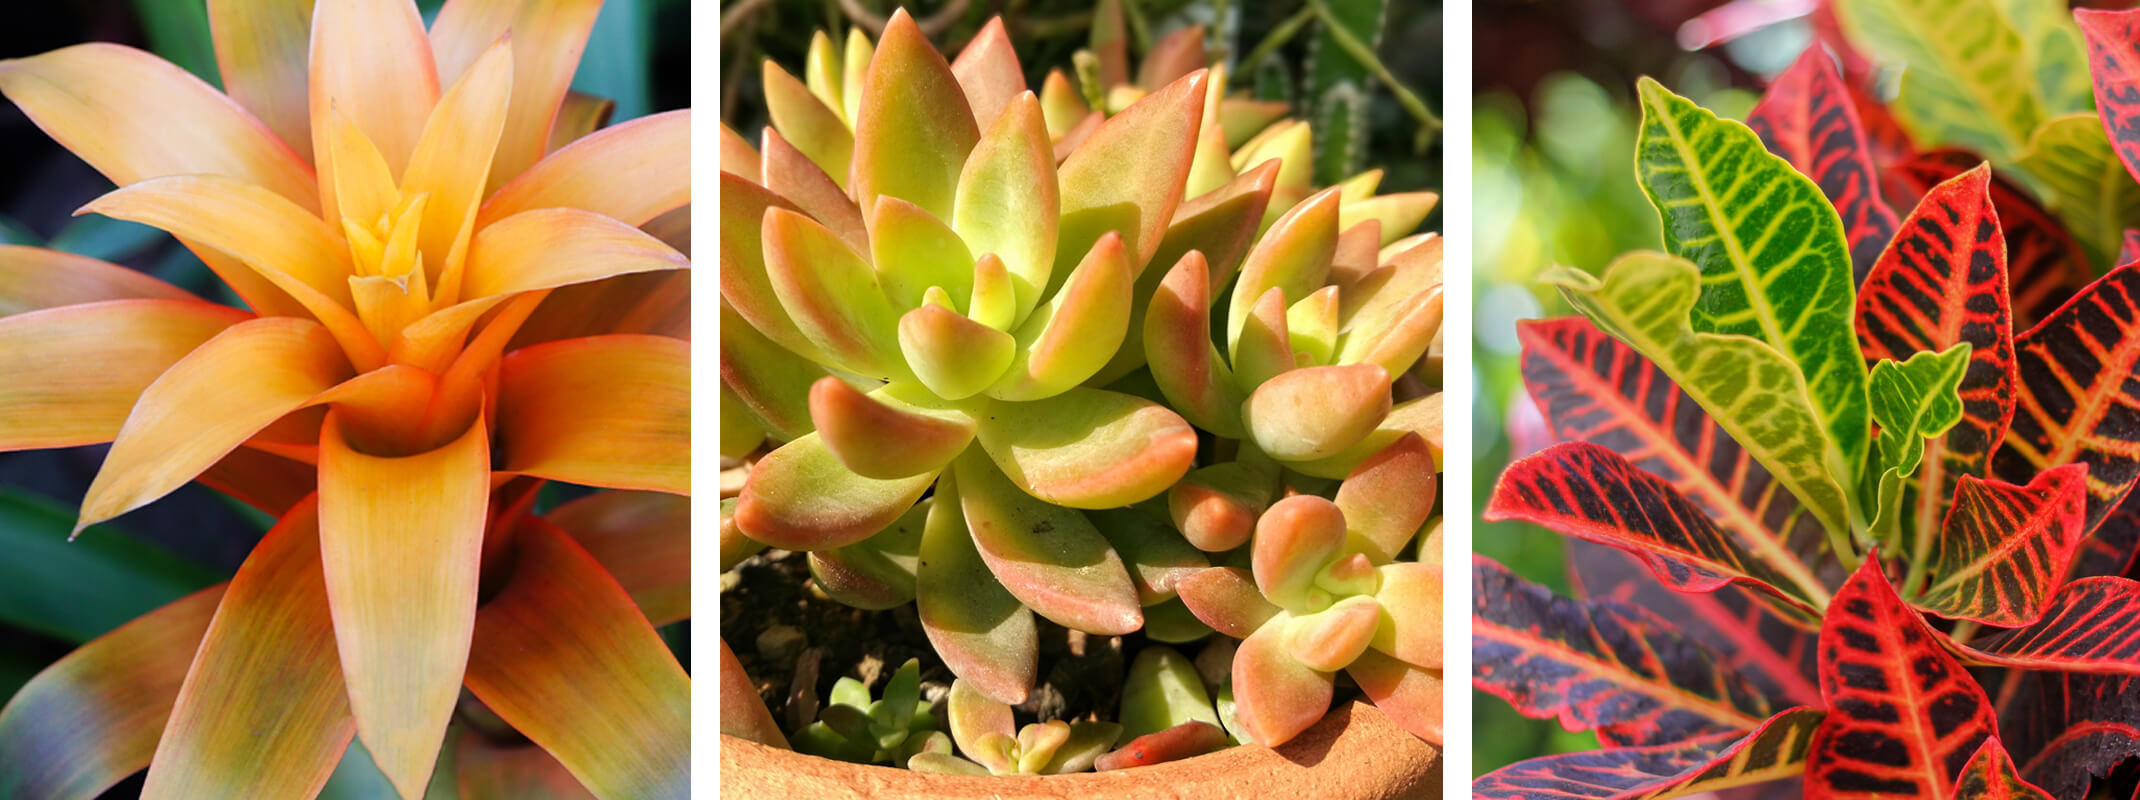 3 images of fall colored houseplants with the first image being a bromeliad with a peachy orange color, stonecrop sedum and croton